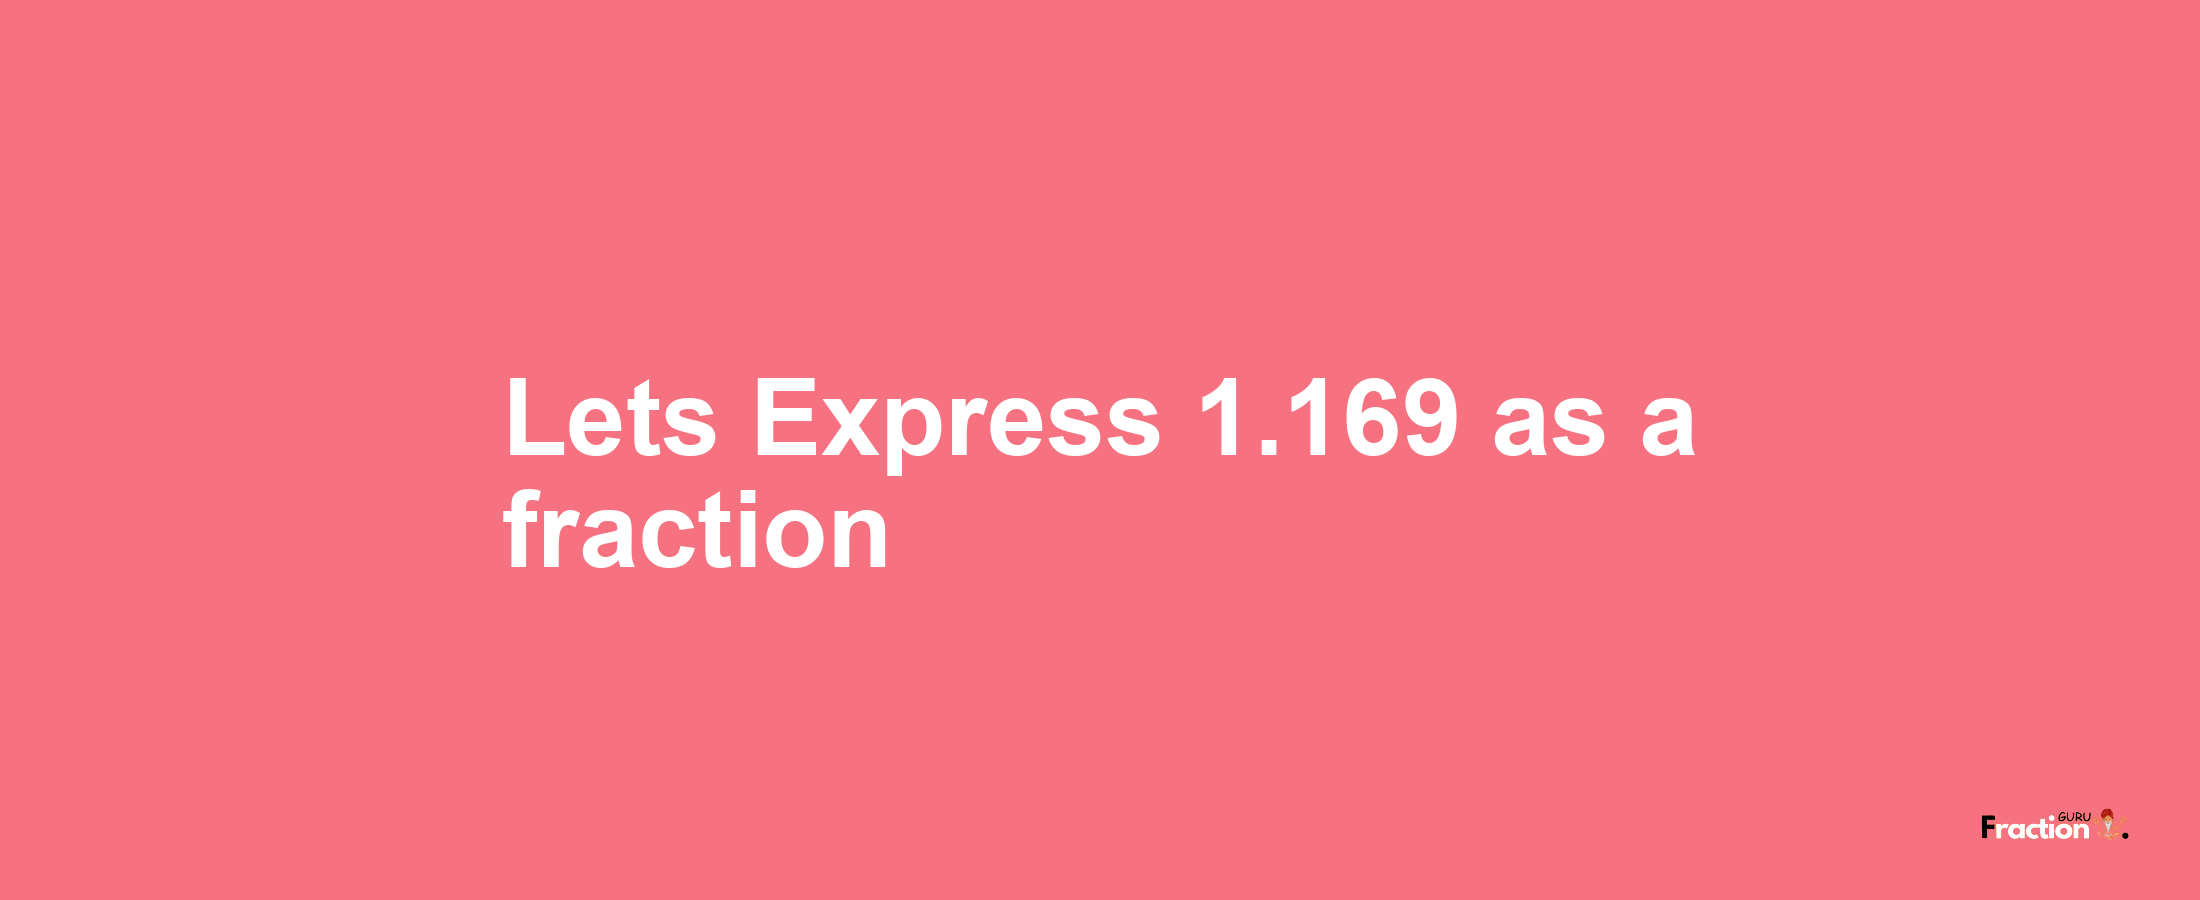 Lets Express 1.169 as afraction